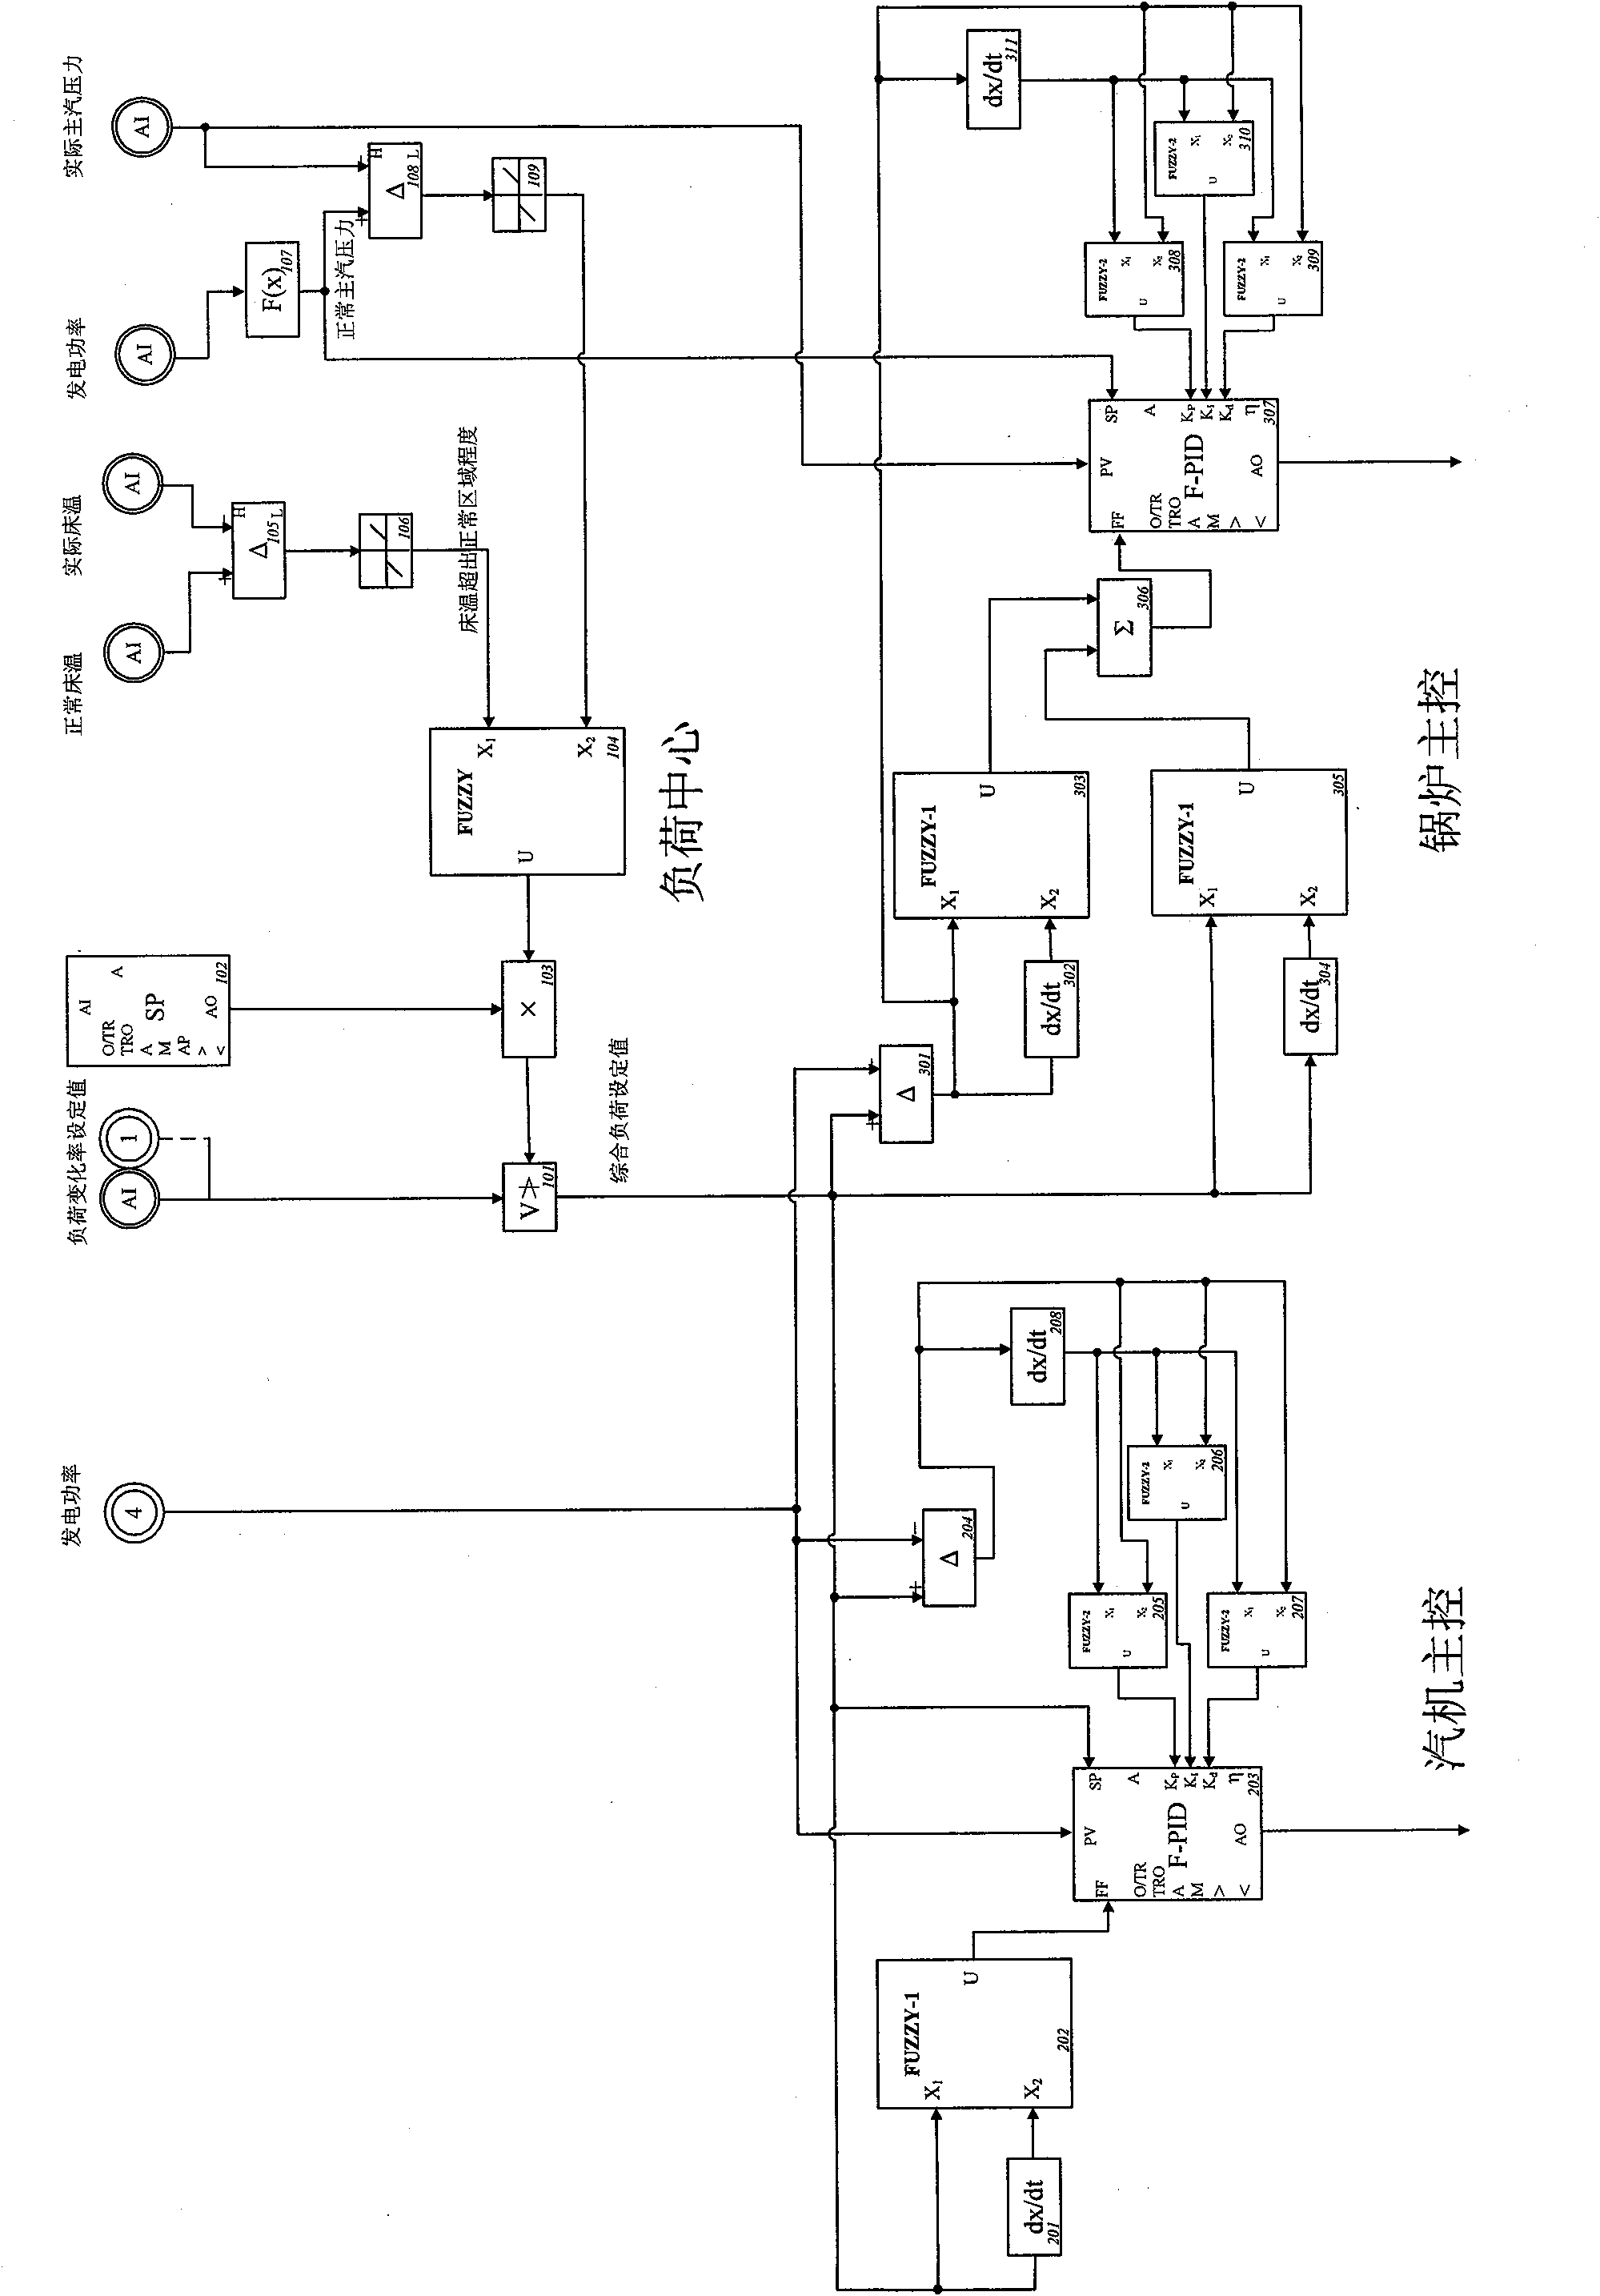 Large circulating fluidized bed unit cooperative control device based on intensified combustion